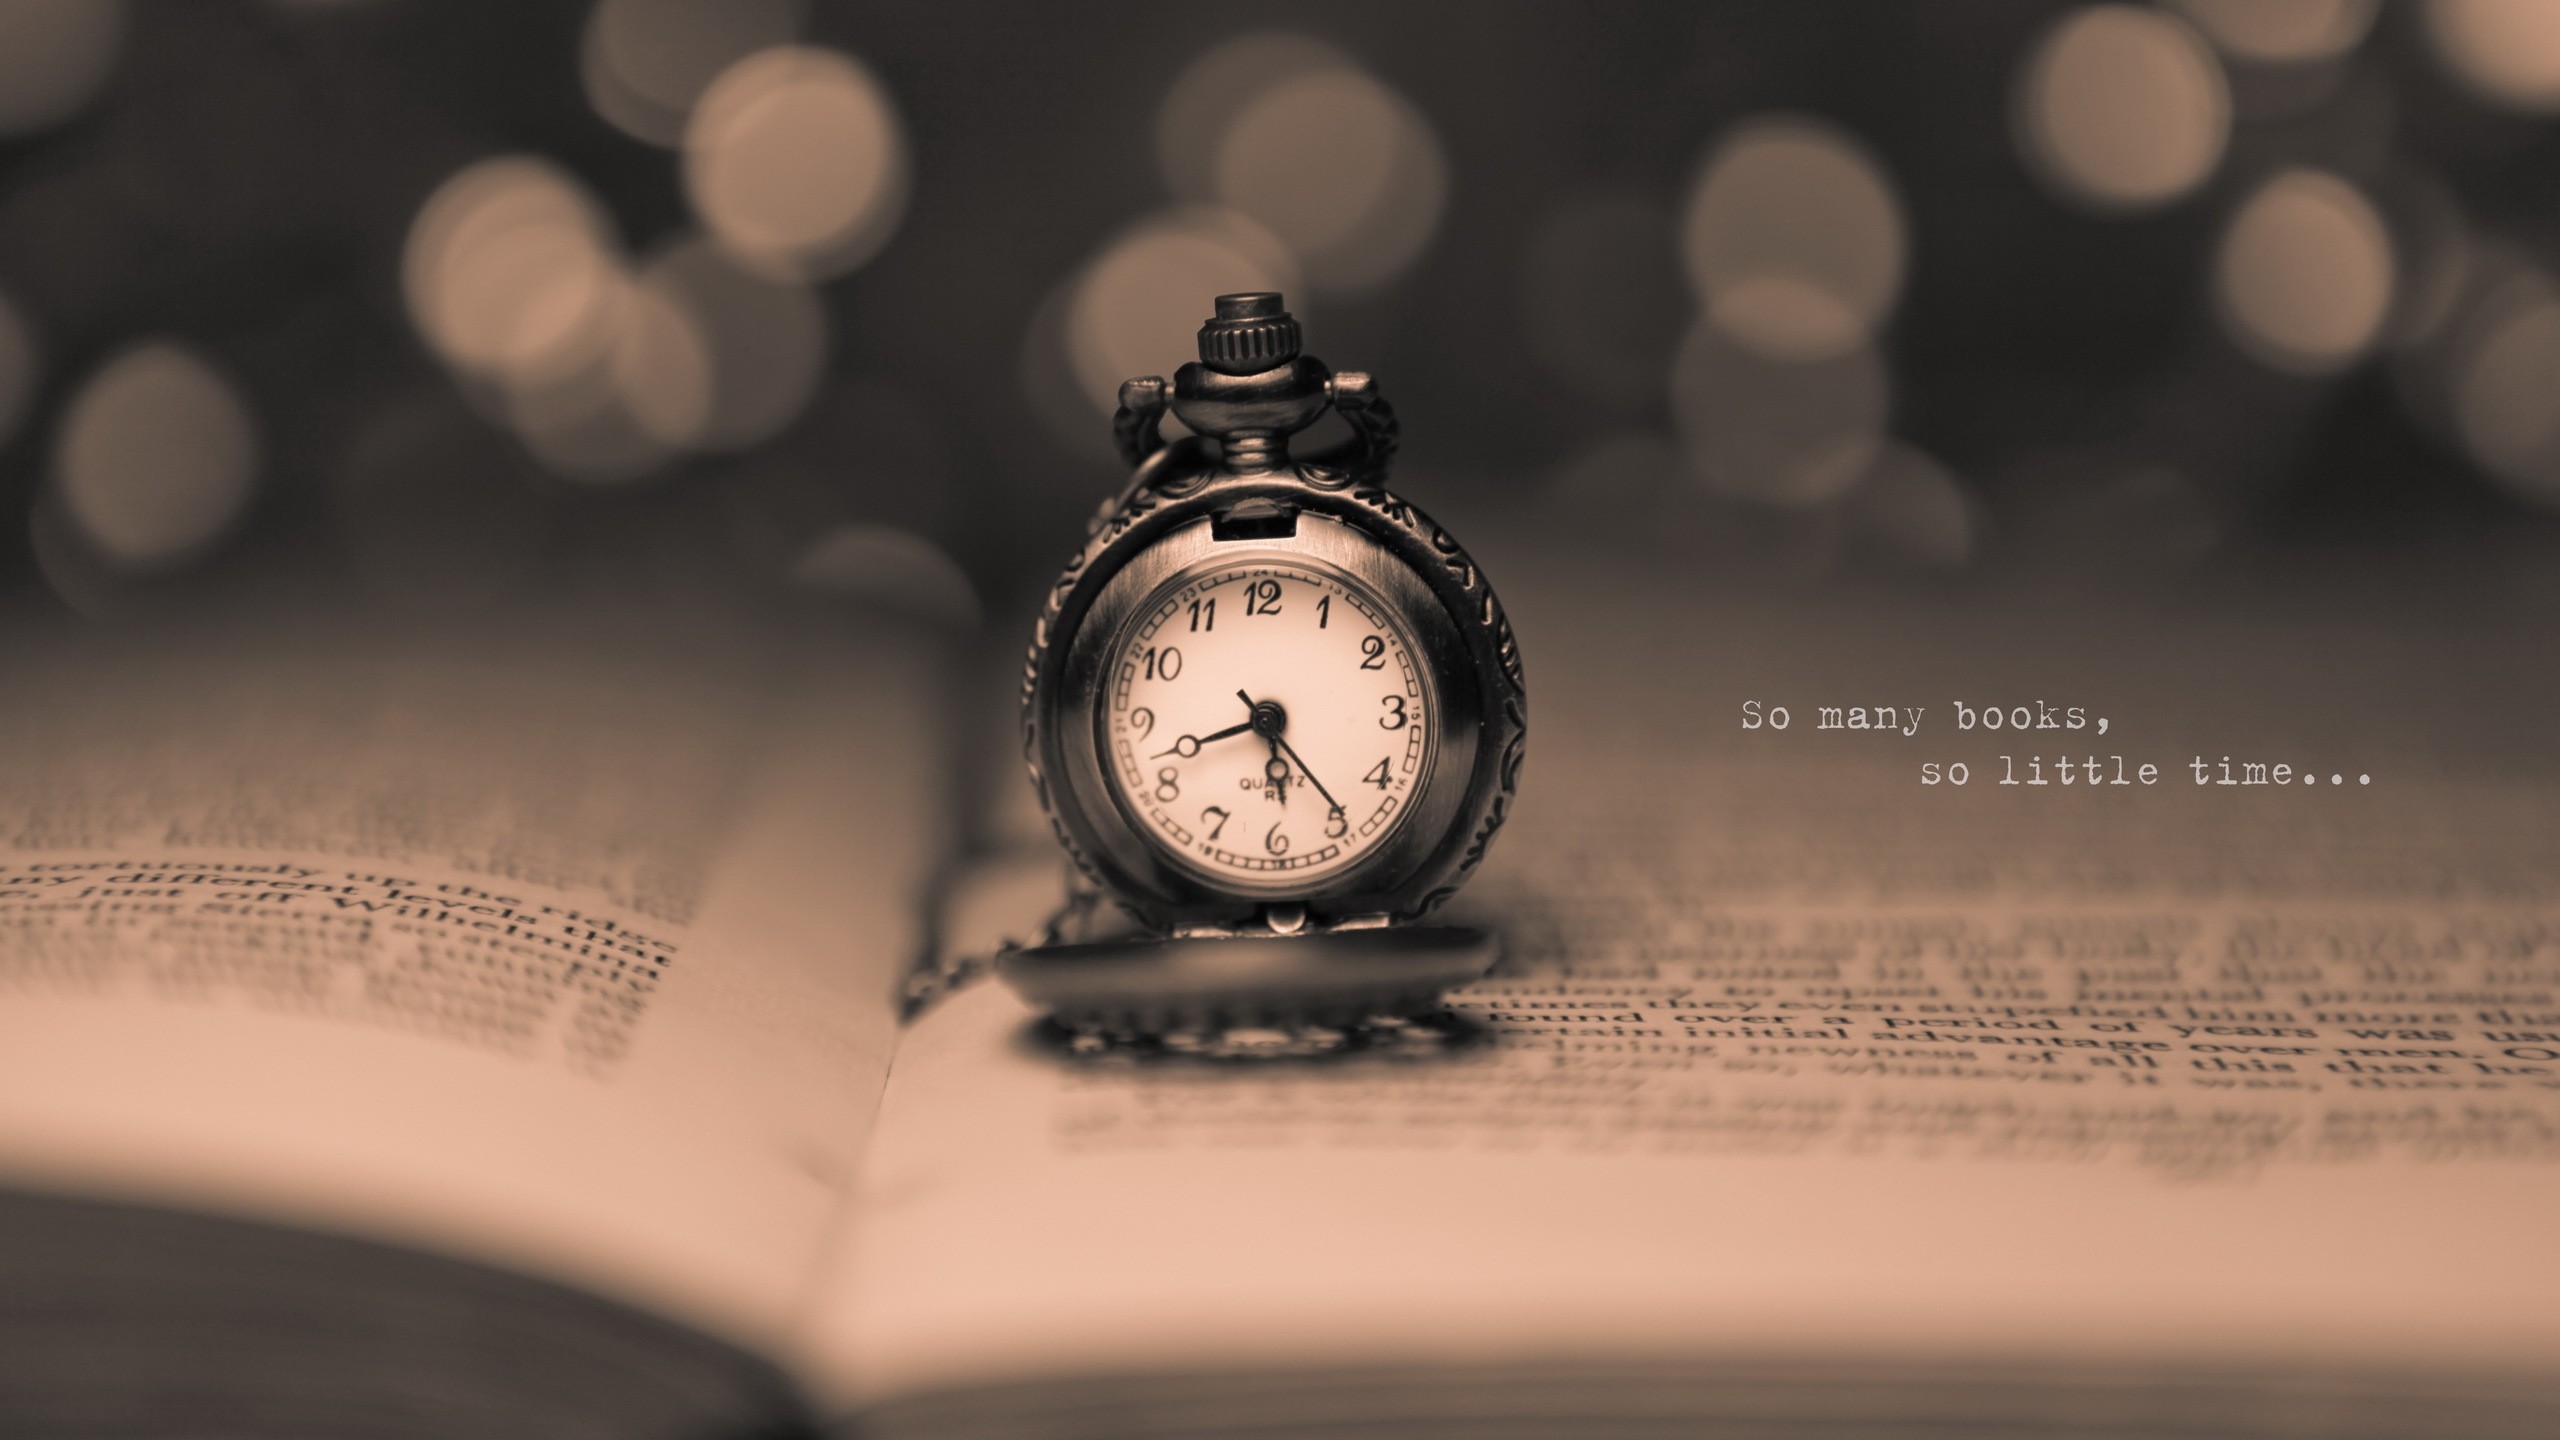 wallpaper watch time,watch,pocket watch,still life photography,fashion accessory,photography